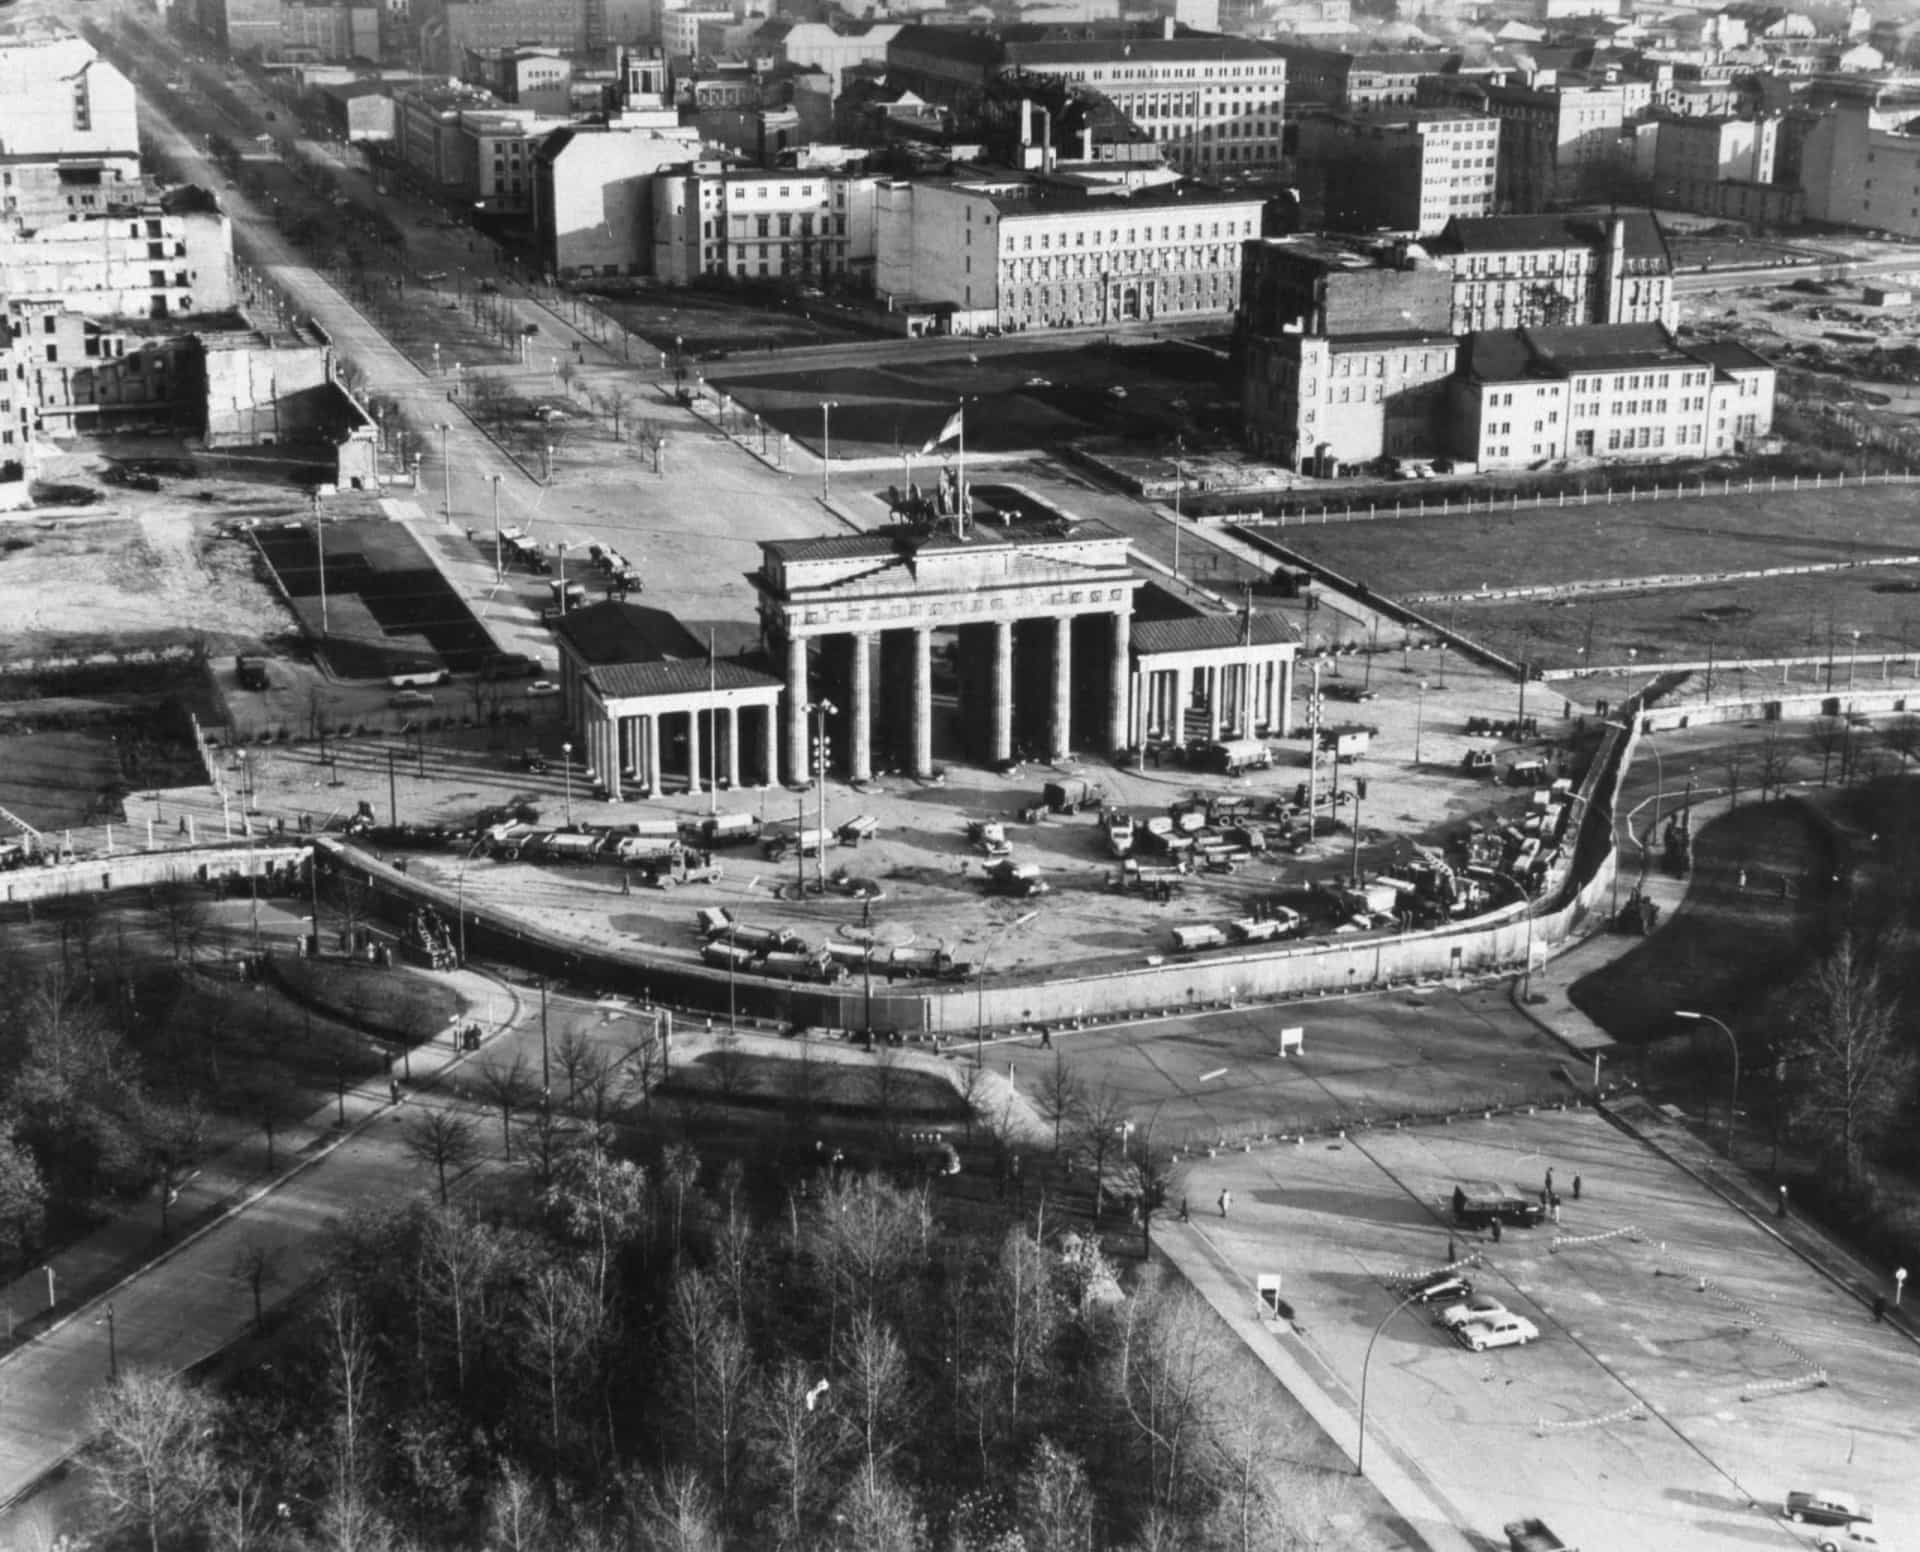 <p>The 18th-century neoclassical Brandenburg Gate, a Berlin landmark that survived the ravages of the Second World War, found itself at the very heart of a divided Berlin, and a carved up Germany. The Berlin Wall stood for 28 years before being torn down as communism across Europe crumbled. </p><p>Sources: (<a href="https://www.britannica.com/topic/Berlin-Wall" rel="noopener">Britannica</a>) (<a href="https://www.history.com/topics/cold-war/berlin-wall" rel="noopener">History</a>)</p><p>See also: <a href="https://www.starsinsider.com/lifestyle/493244/read-all-about-these-cold-war-facts-and-trivia">Read all about these Cold War facts and trivia</a></p><p><a href="https://www.msn.com/en-us/community/channel/vid-7xx8mnucu55yw63we9va2gwr7uihbxwc68fxqp25x6tg4ftibpra?cvid=94631541bc0f4f89bfd59158d696ad7e">Follow us and access great exclusive content everyday</a></p>